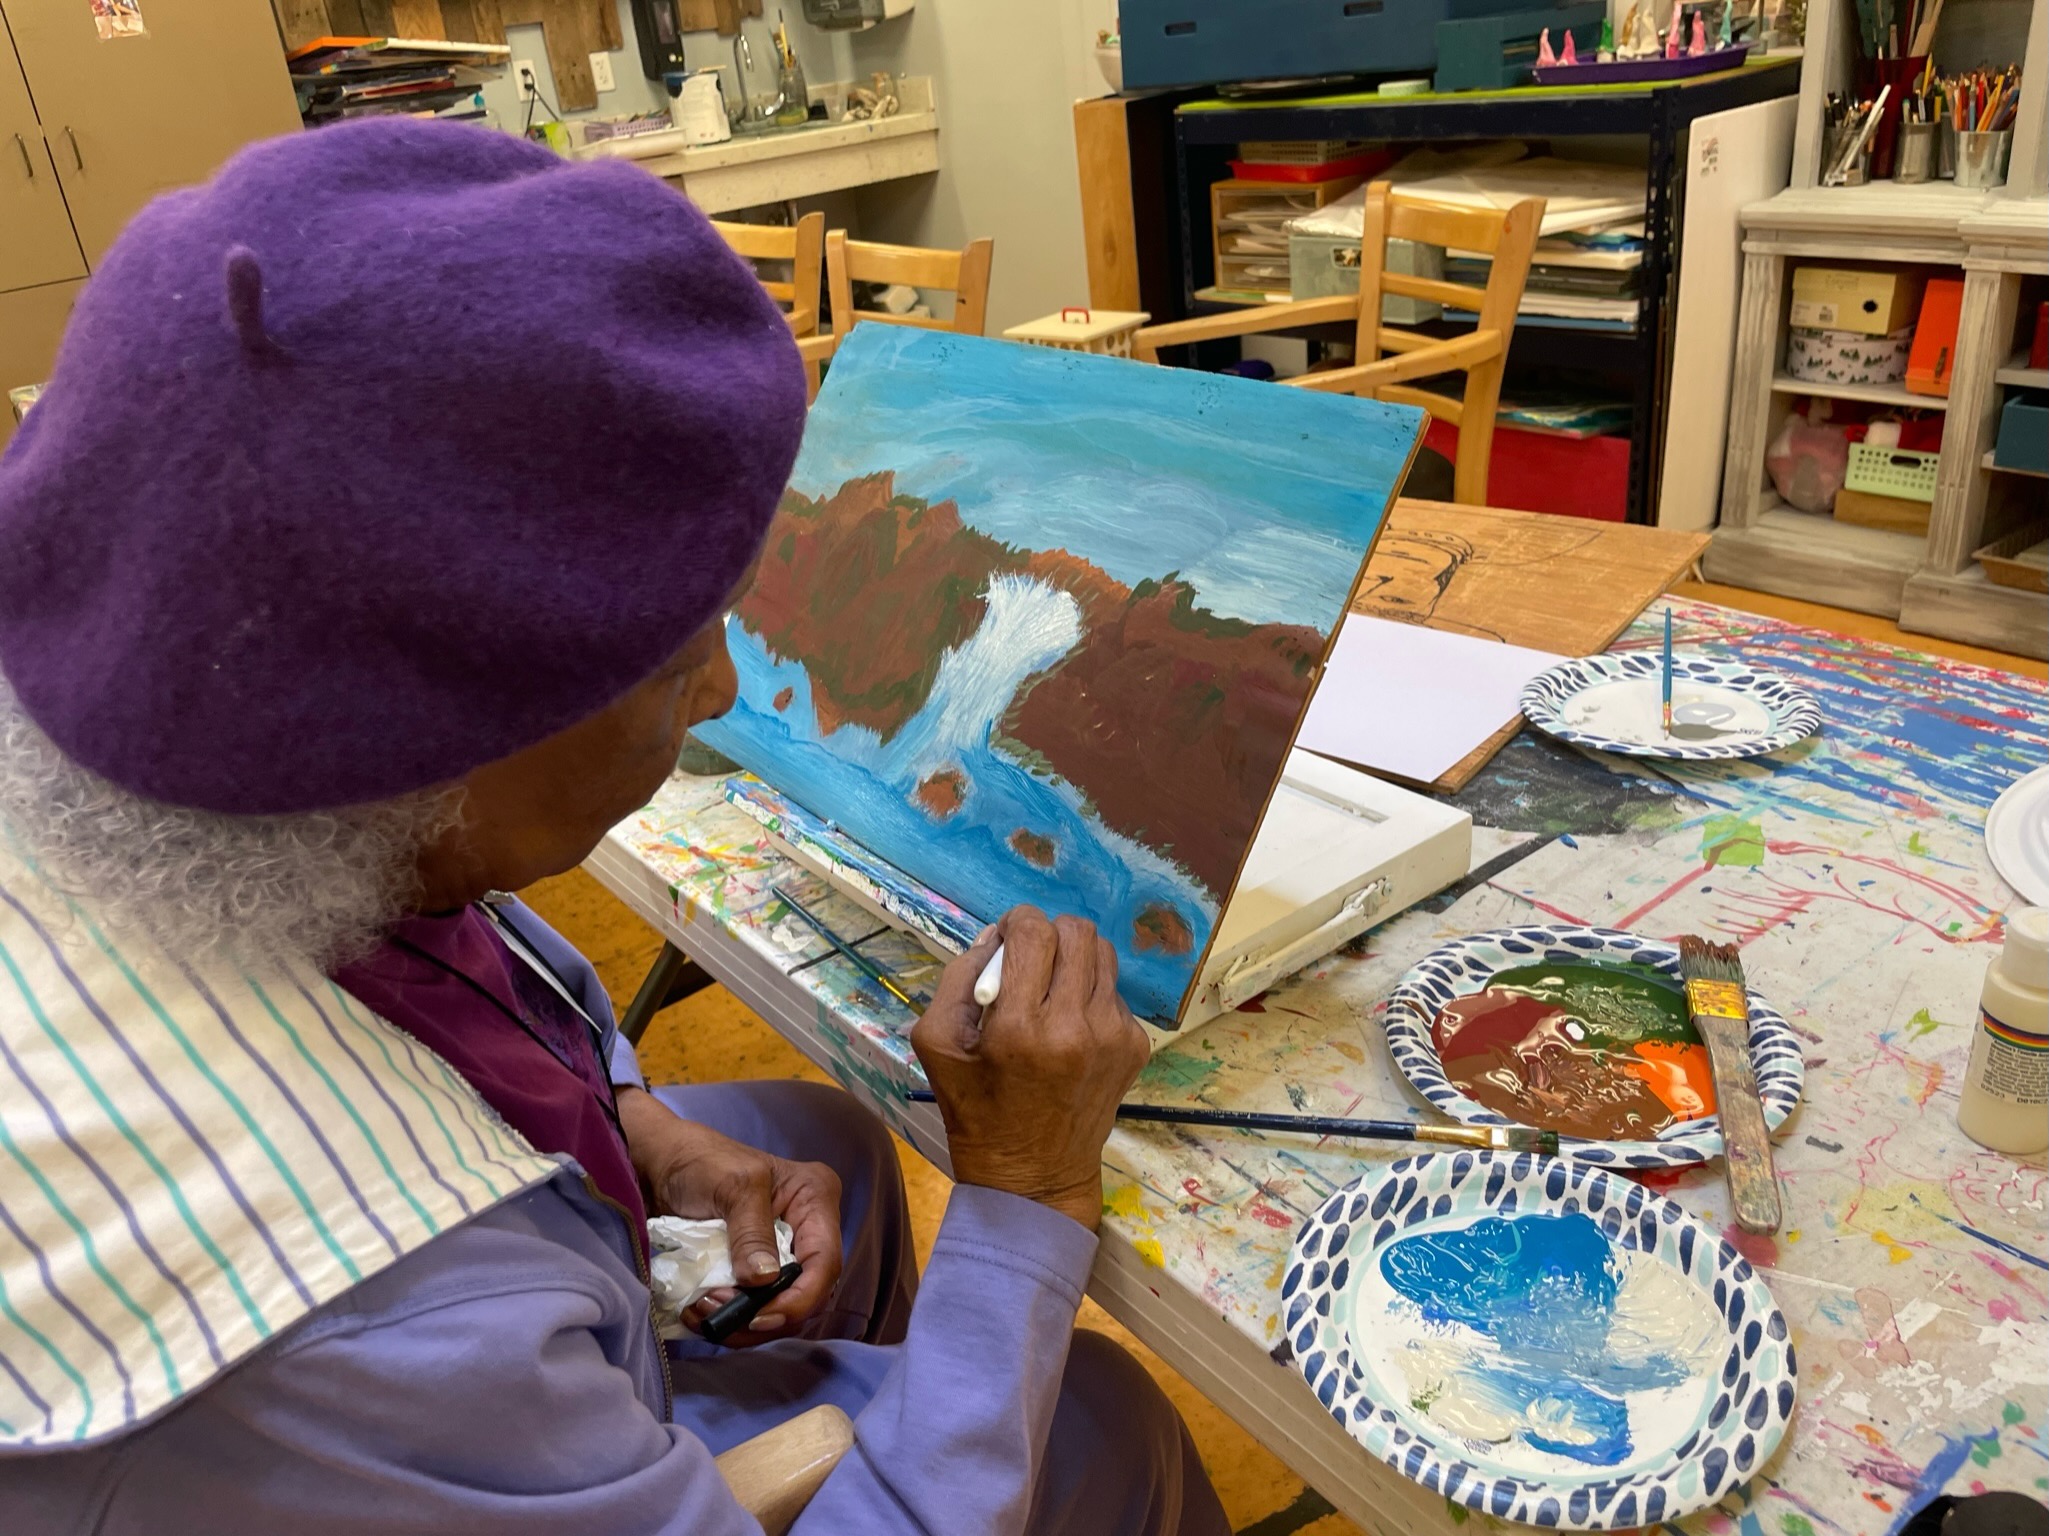 Oakwood Creative Care uses creative therapy to spark joy for seniors with cognitive and physical challenges, such as those resulting from a stroke